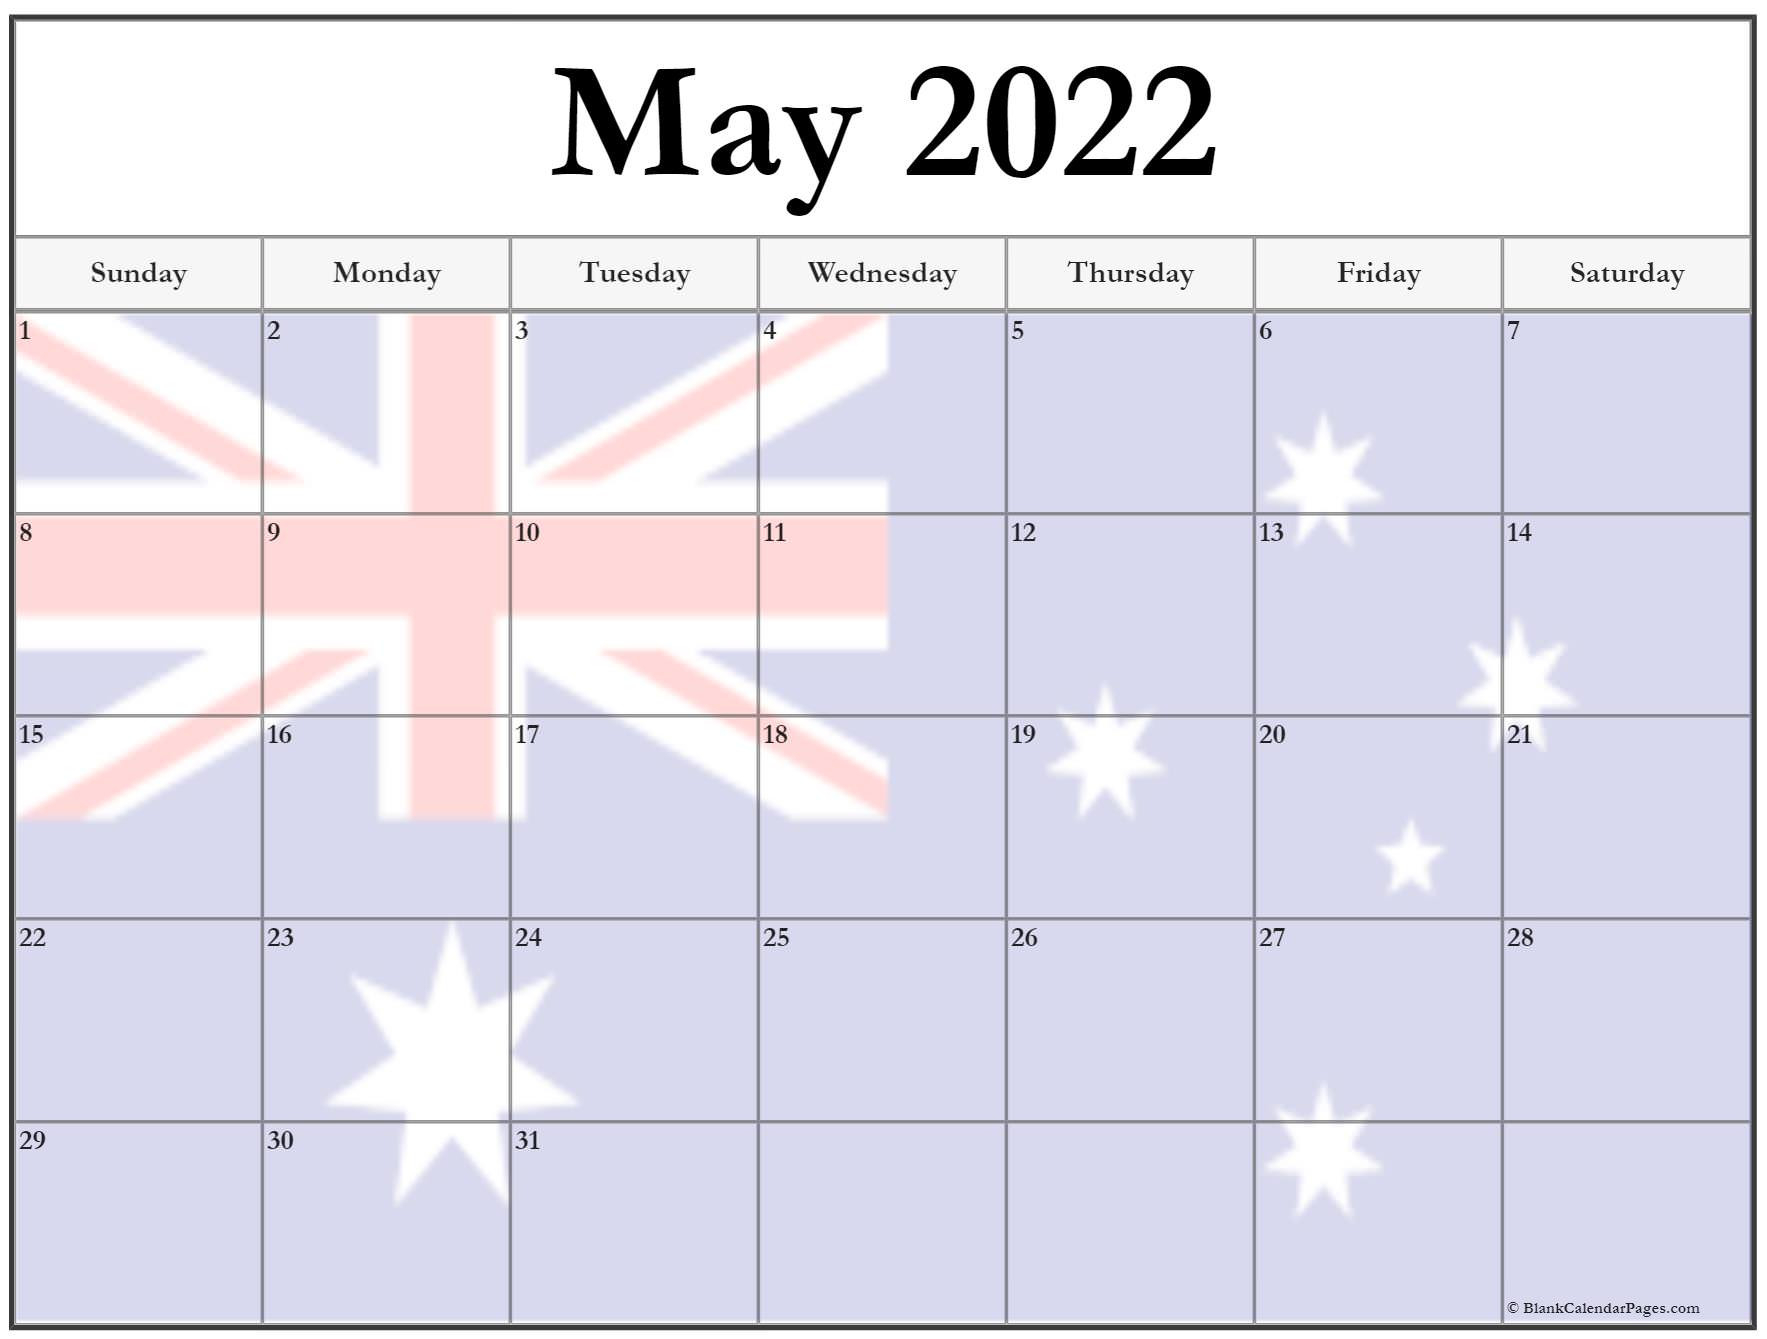 Collection Of May 2022 Photo Calendars With Image Filters.-Free Printable Calendar 2022 Australia